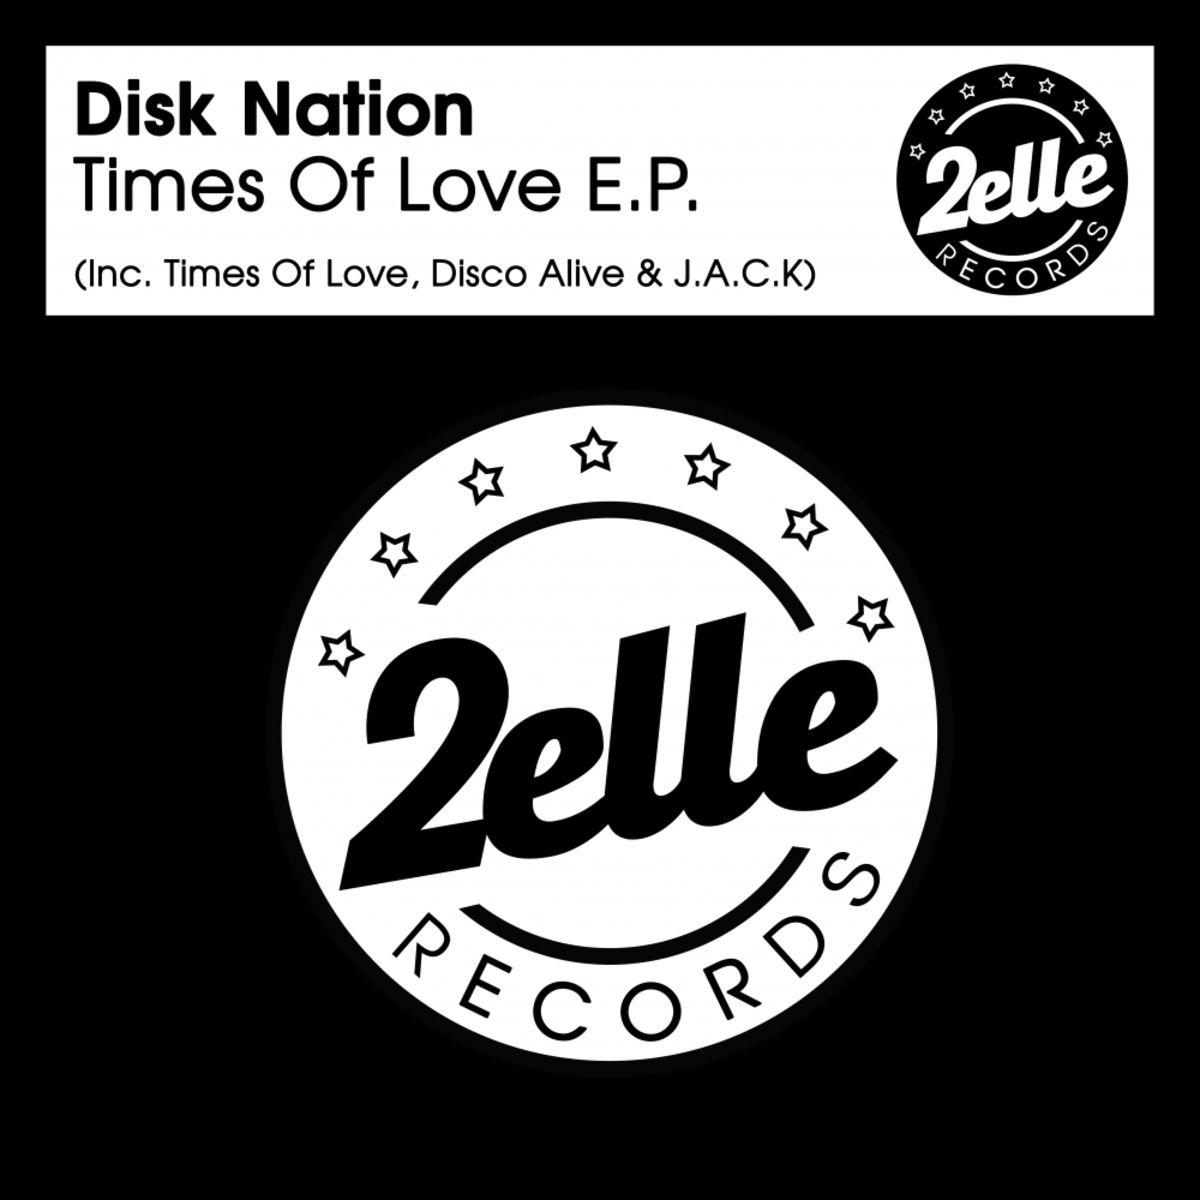 Disk nation - Times Of Love E.P. / 2EllE Records